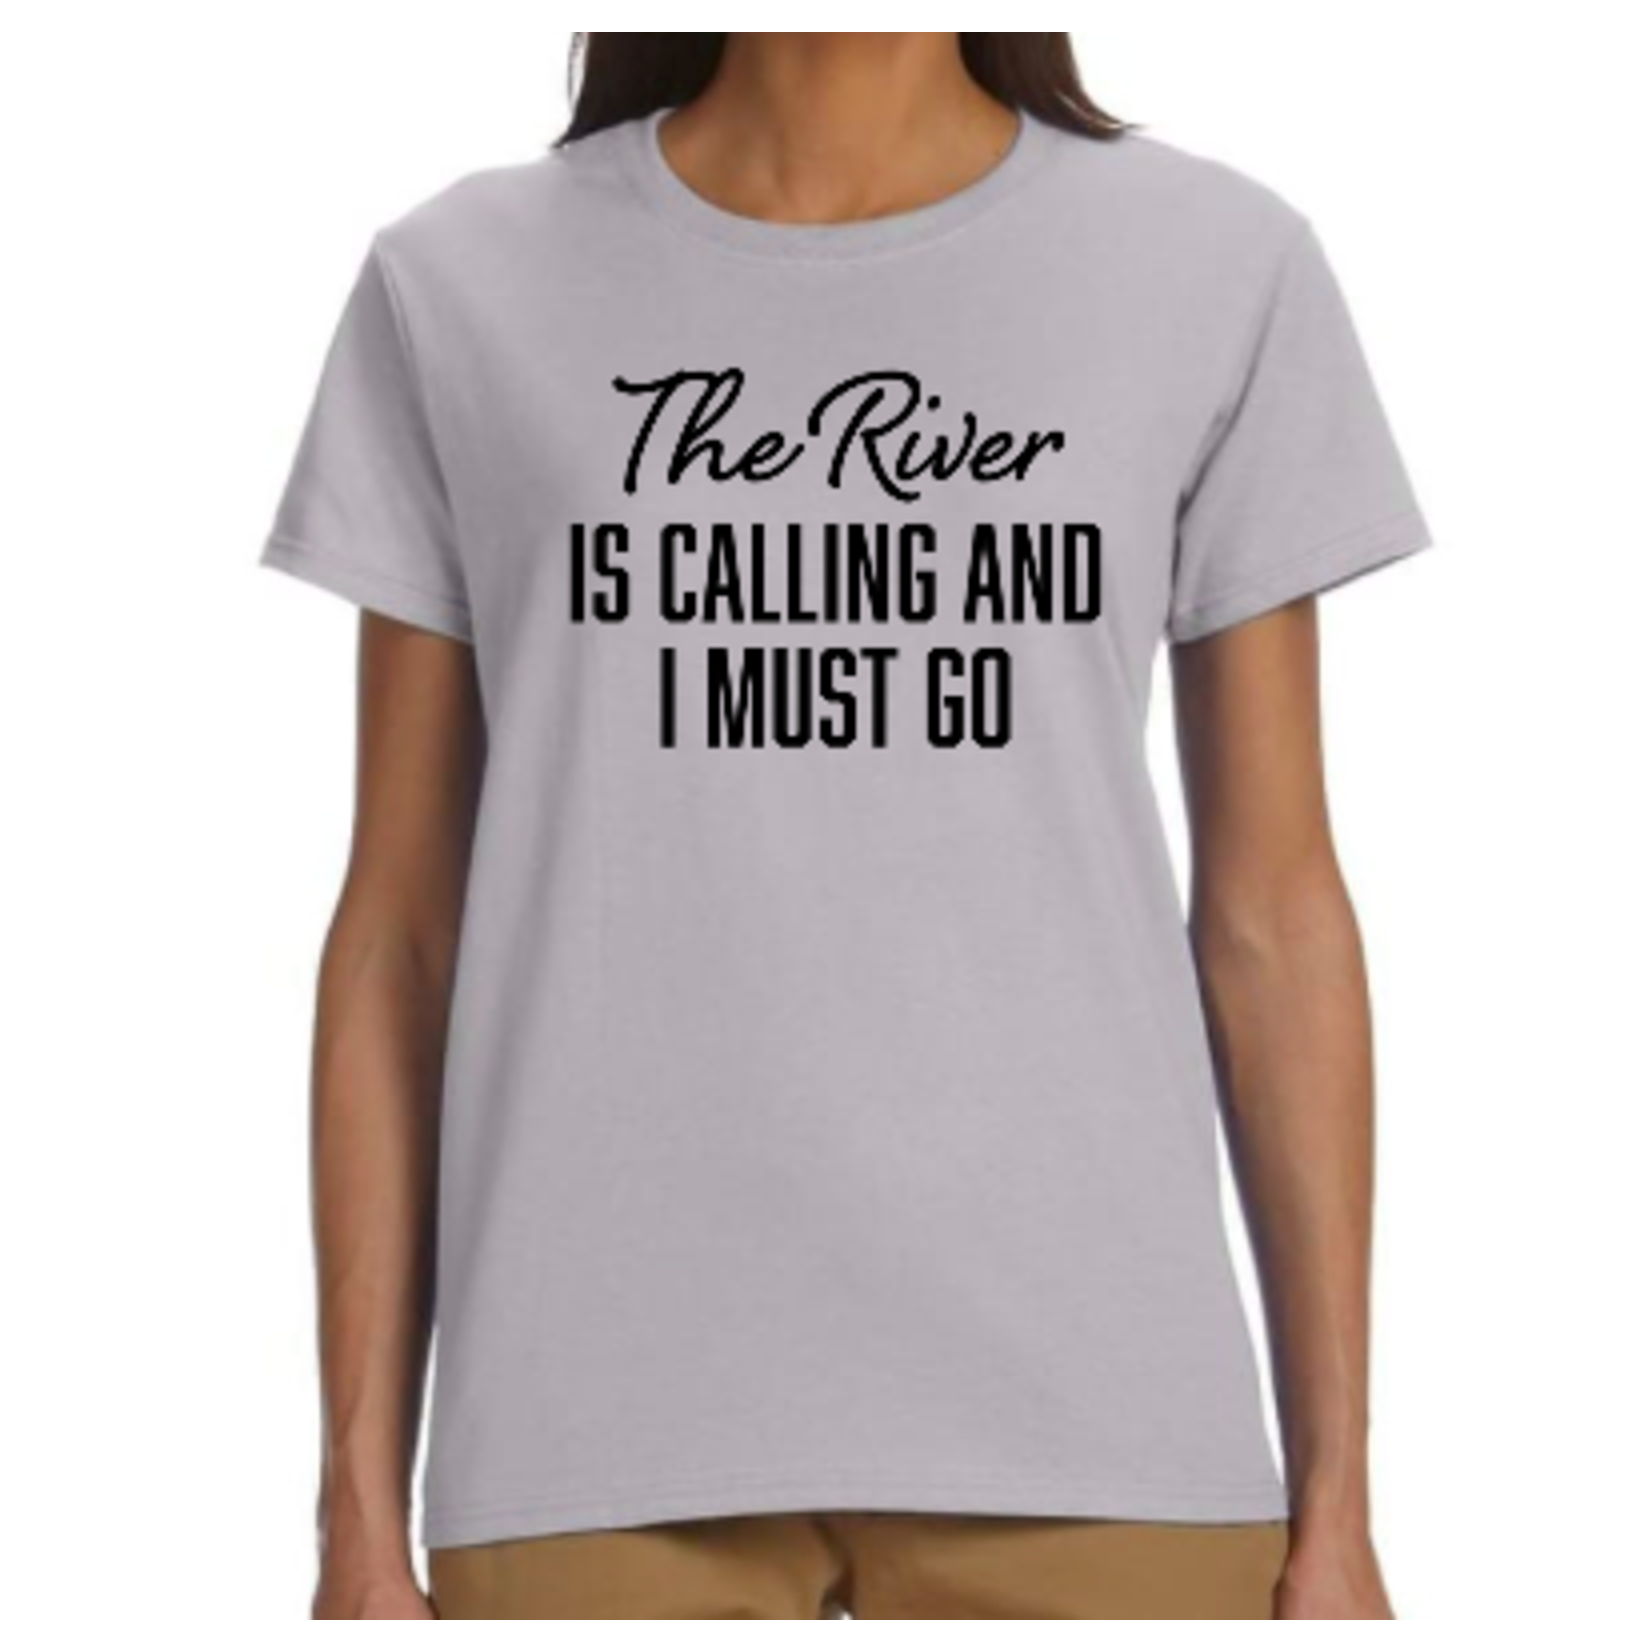 Women's T-shirt: The river is calling me and I must go